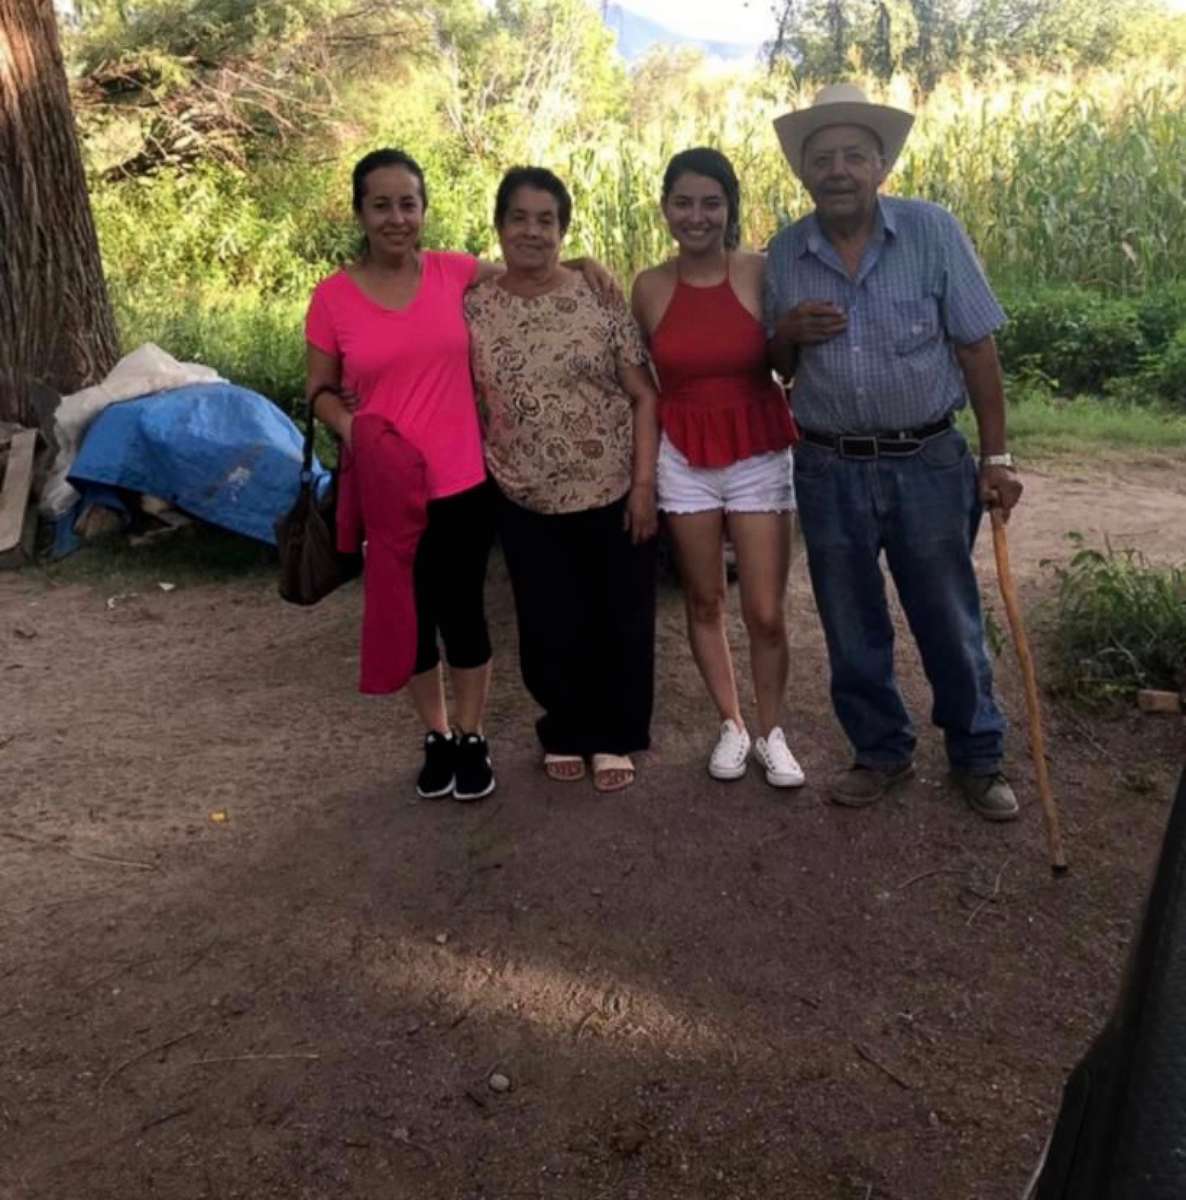 PHOTO: Nataly Morales Villa poses with her mom and grandparents in this undated family photo.